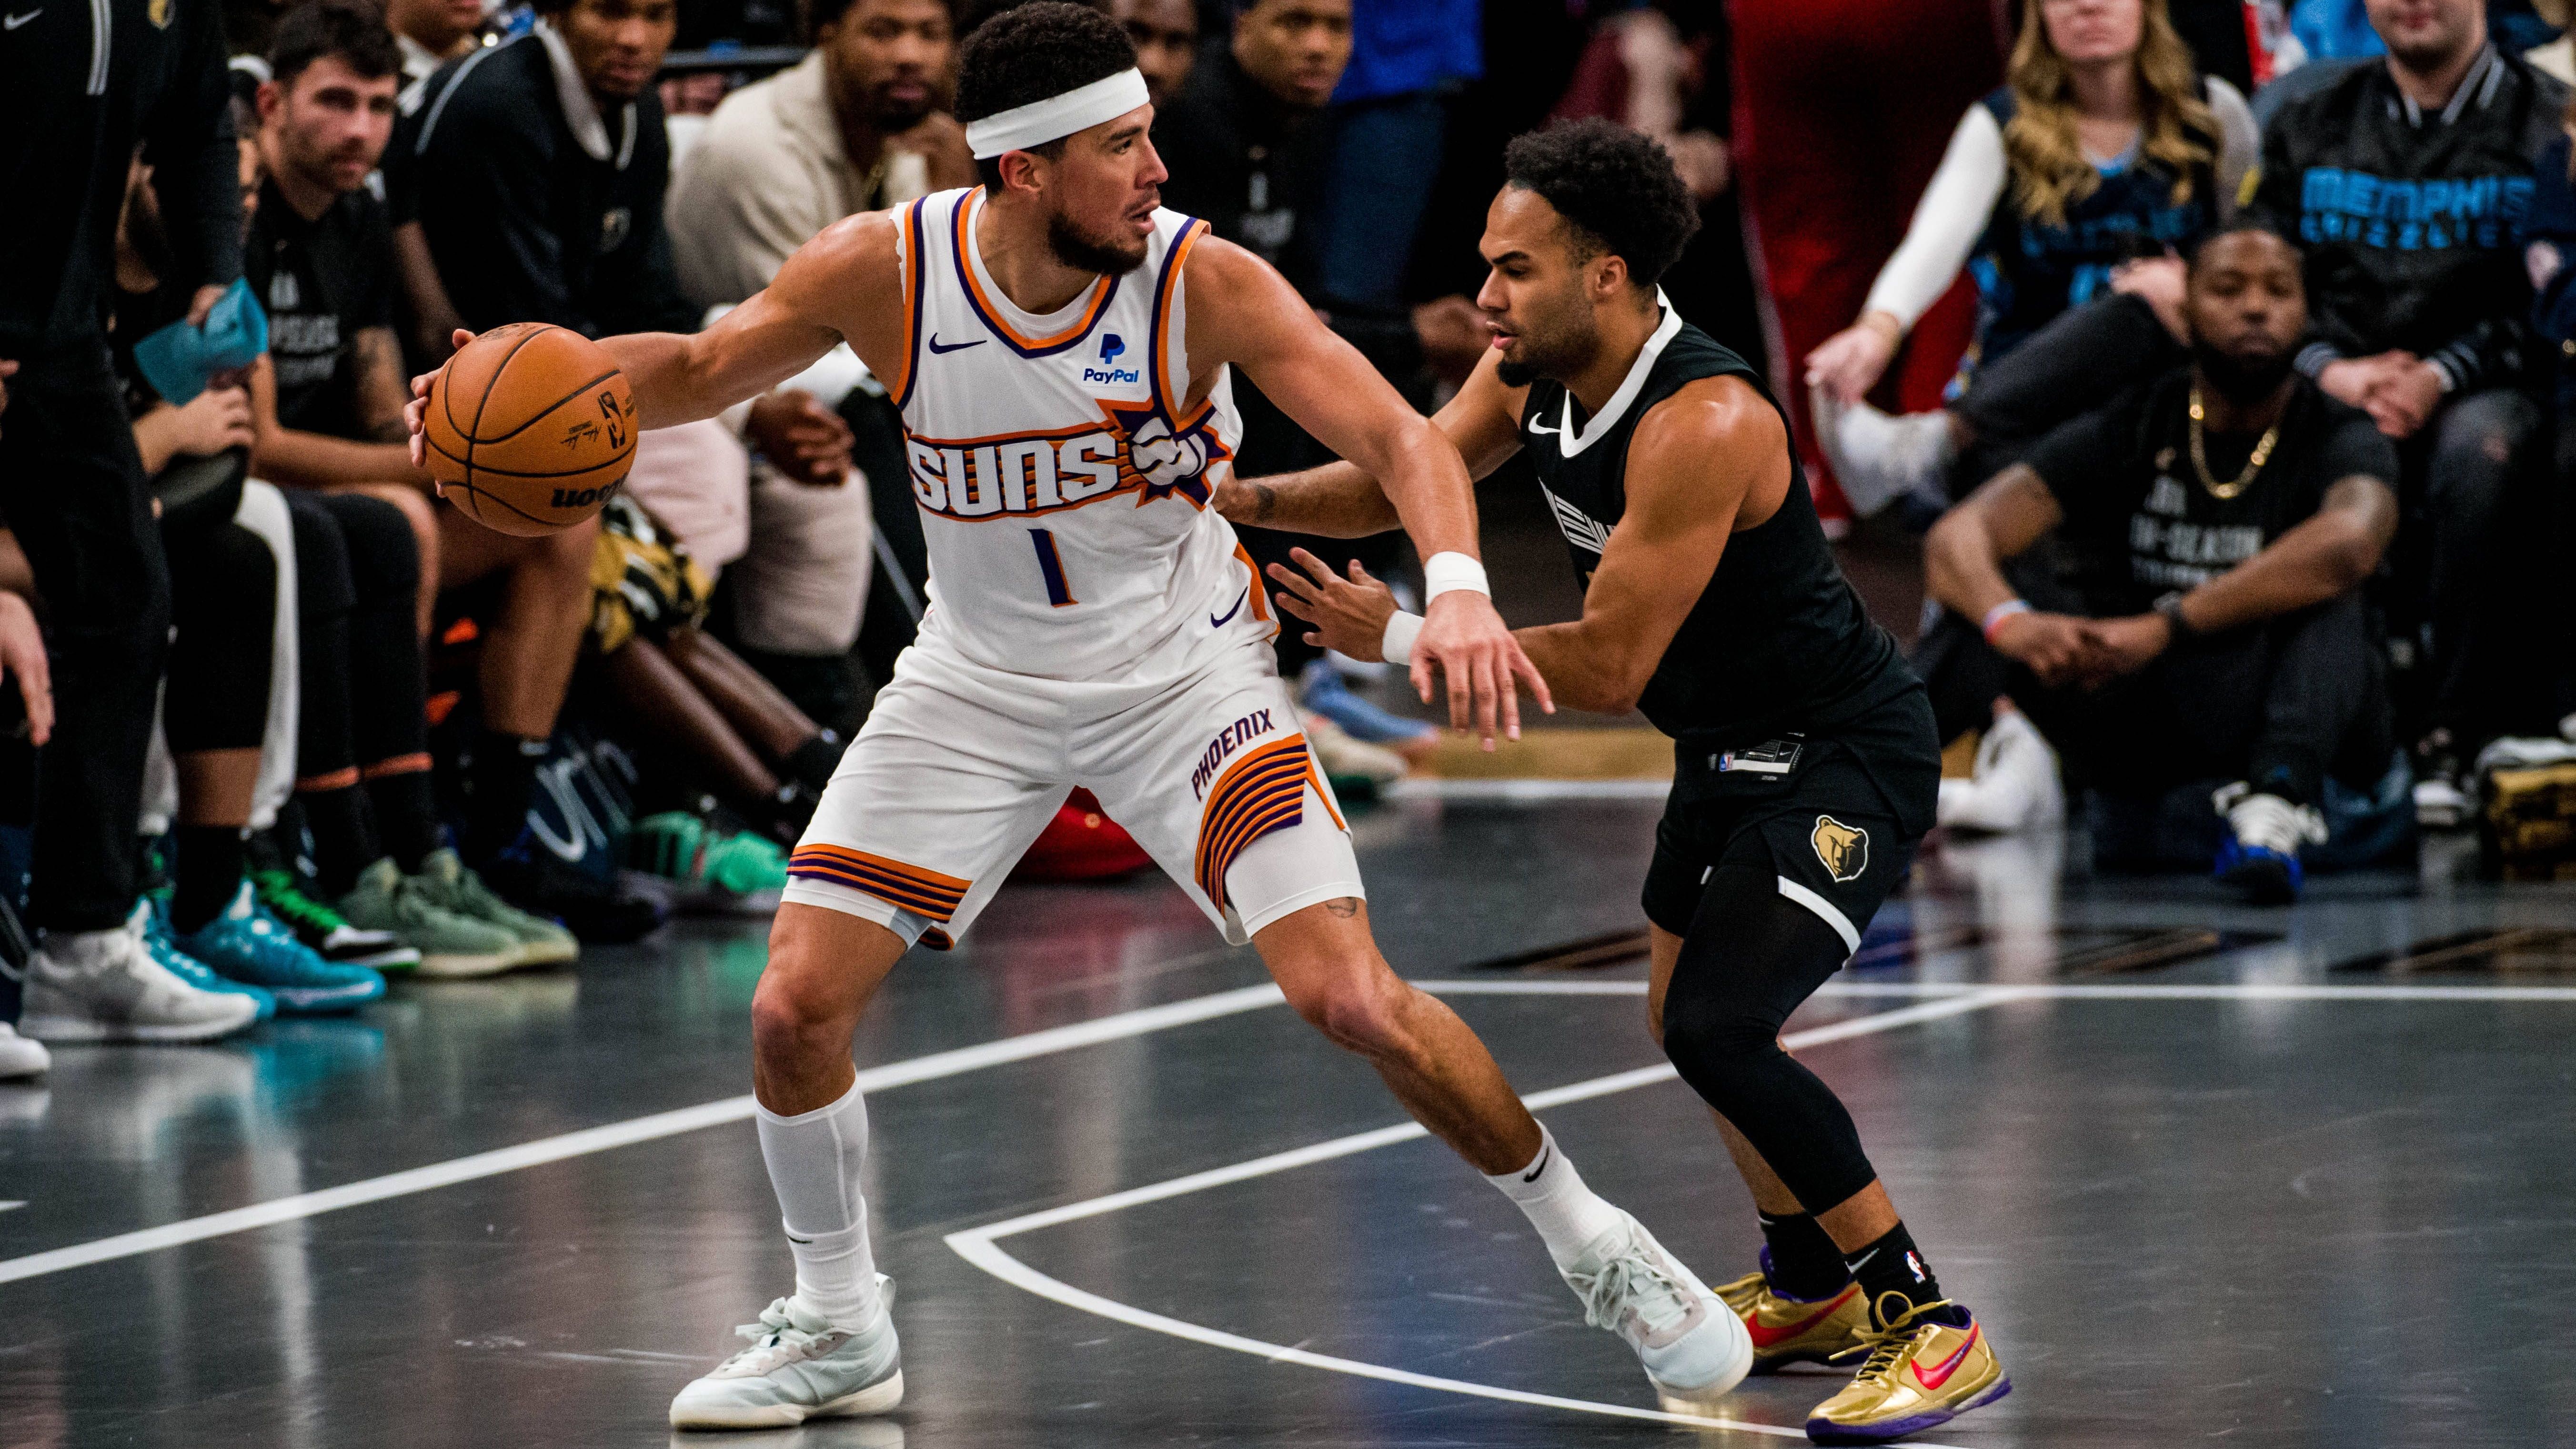 <strong>Jacob Gilyard - 1,75m</strong><br><strong>Teams:</strong> Memphis Grizzlies<br><strong>Karriere-Stats:</strong> 4,7 Punkte, 1,2 Rebounds, 3,5 Assists<br><strong>Auszeichnungen:</strong> -